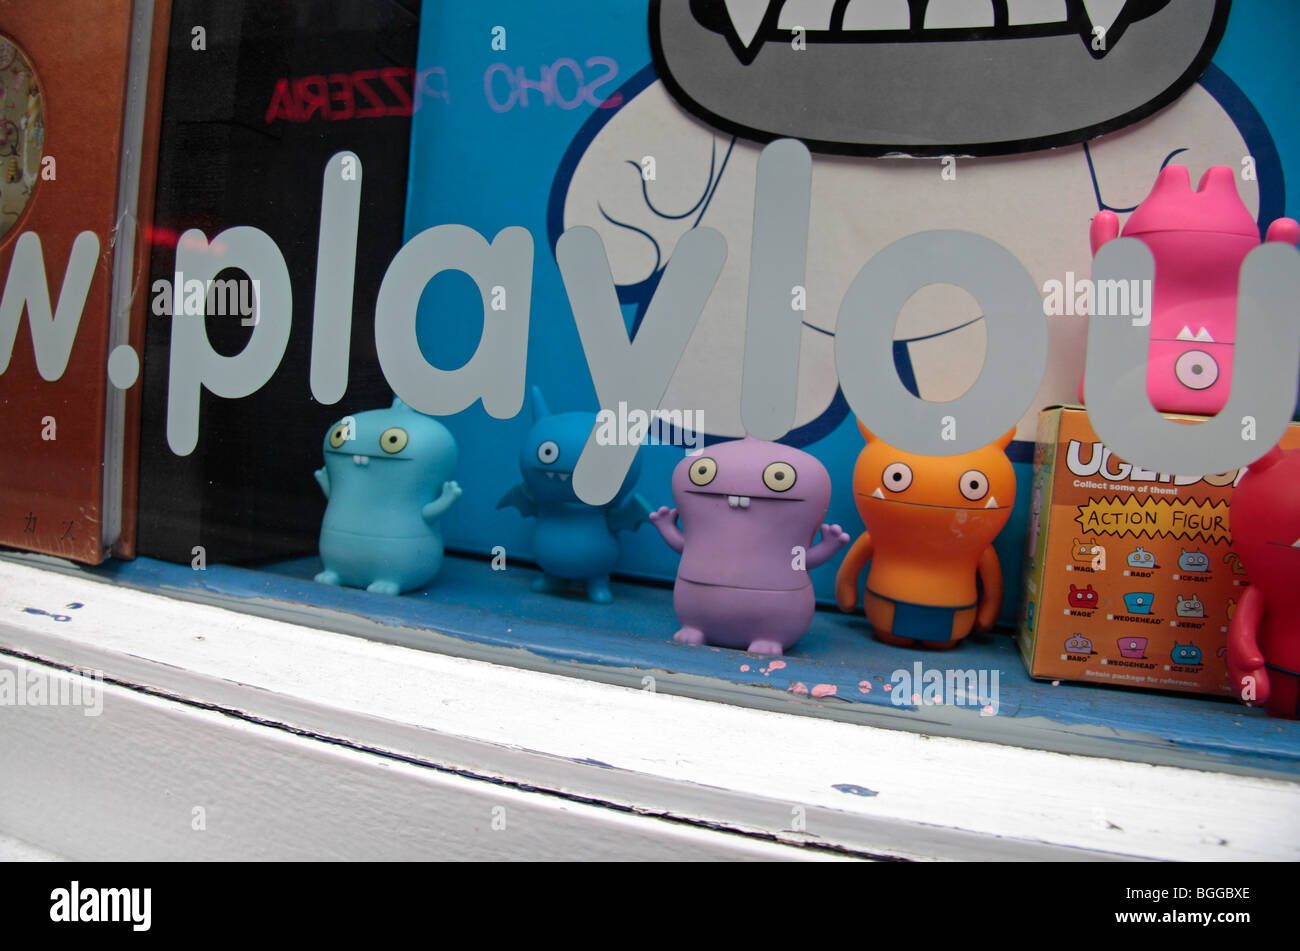 ugly doll shop